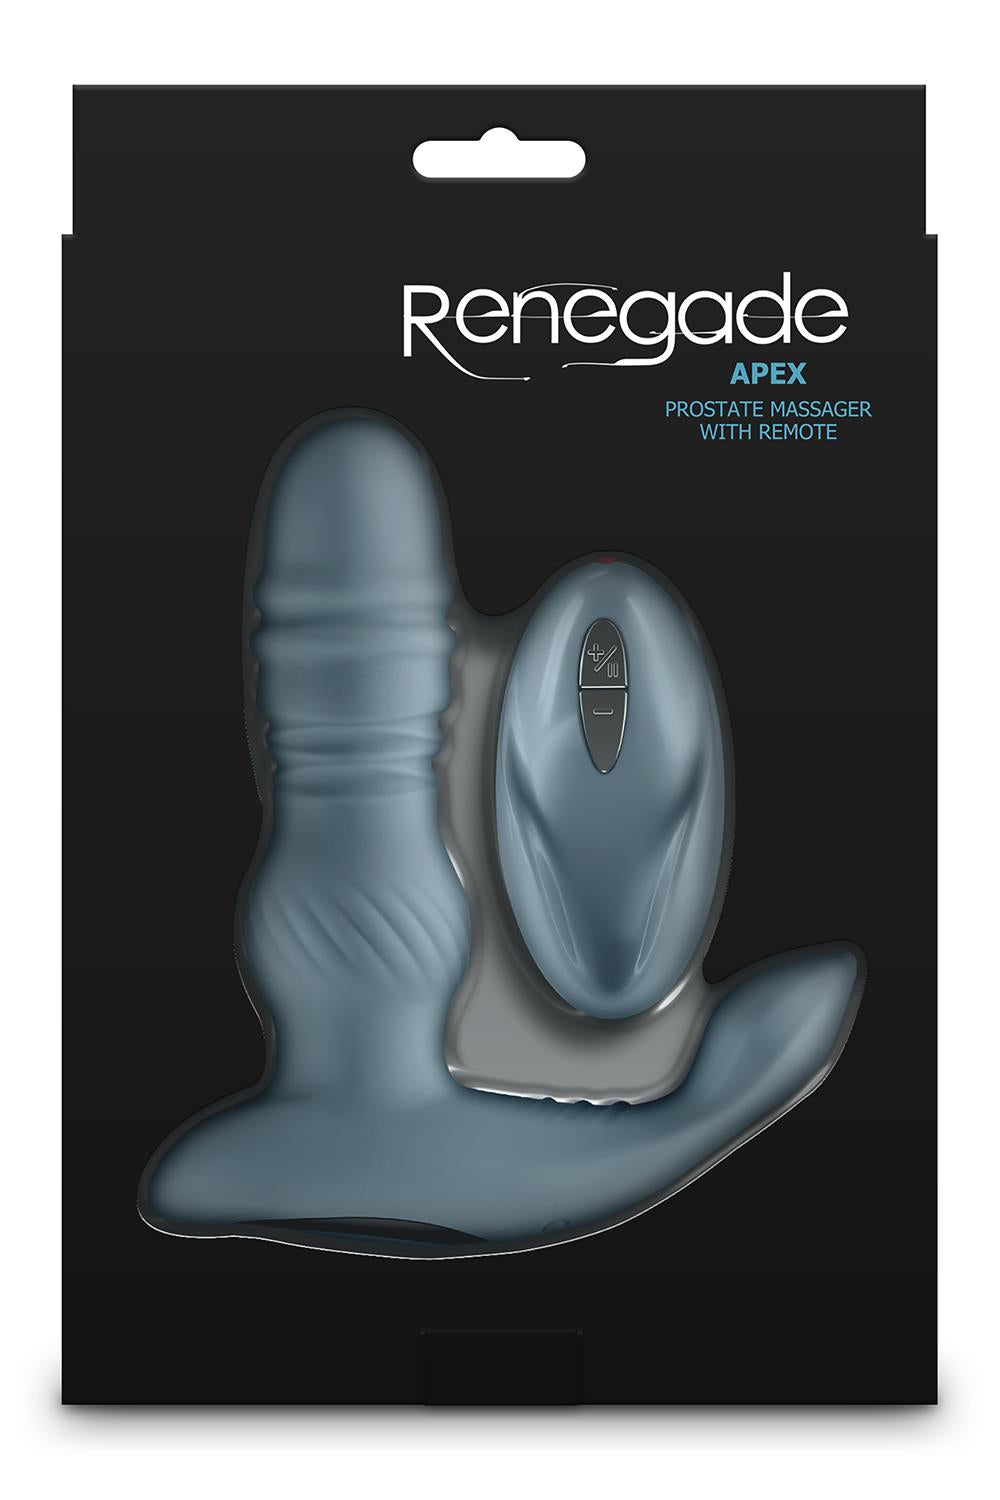 Renegade Apex Rechargeable Silicone Prostate Massager with Remote - The perfect Anal Toy for him